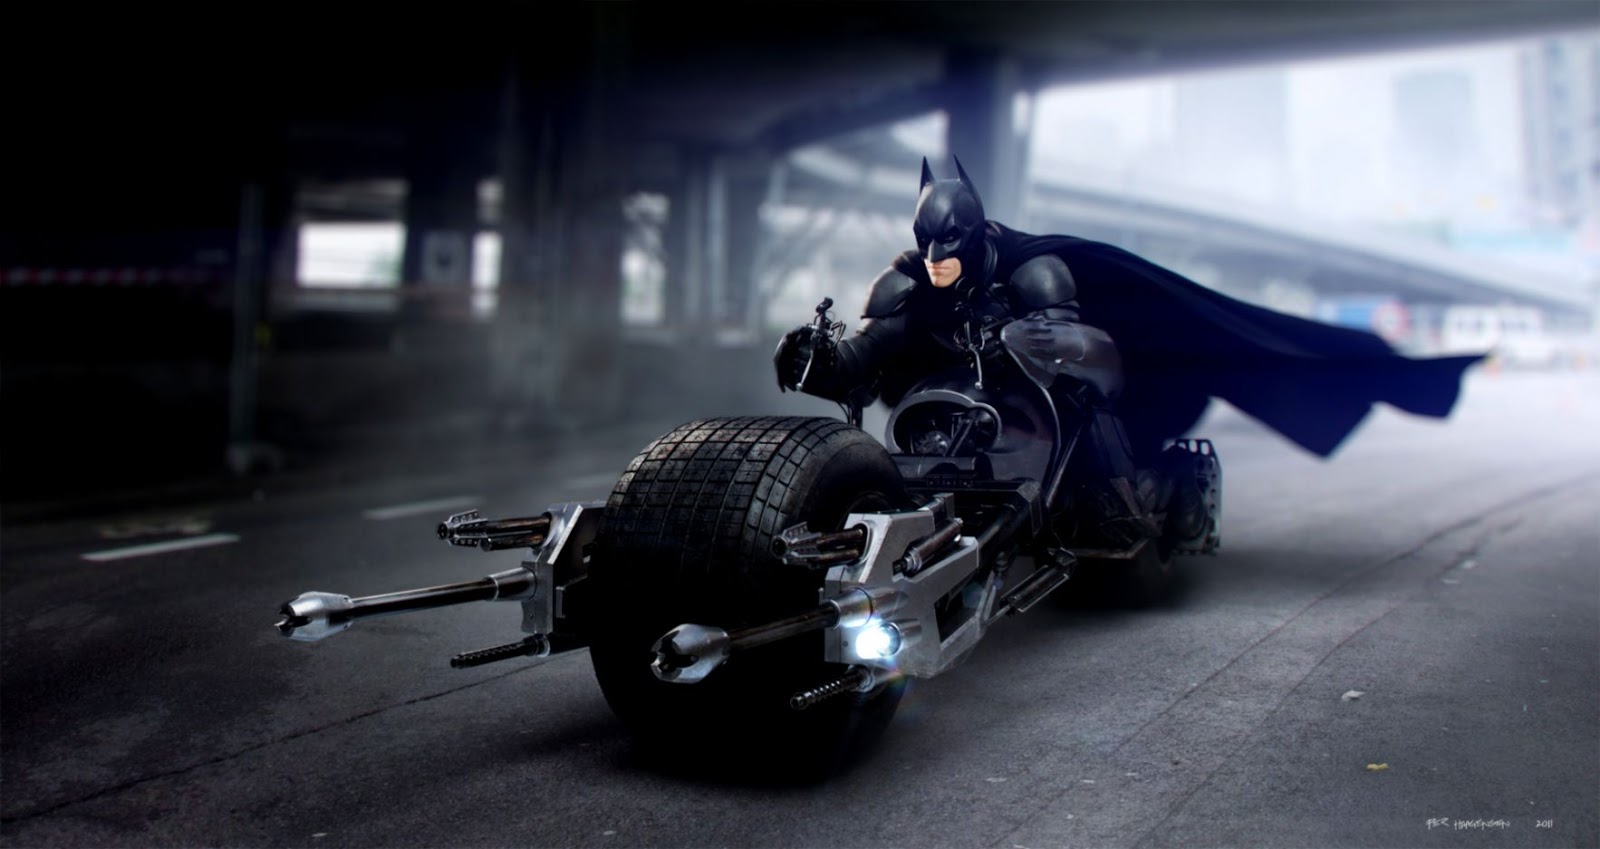 The Dark Knight Rises Wallpaper And Background Image - Batman Dark Knight Rises Batpod , HD Wallpaper & Backgrounds